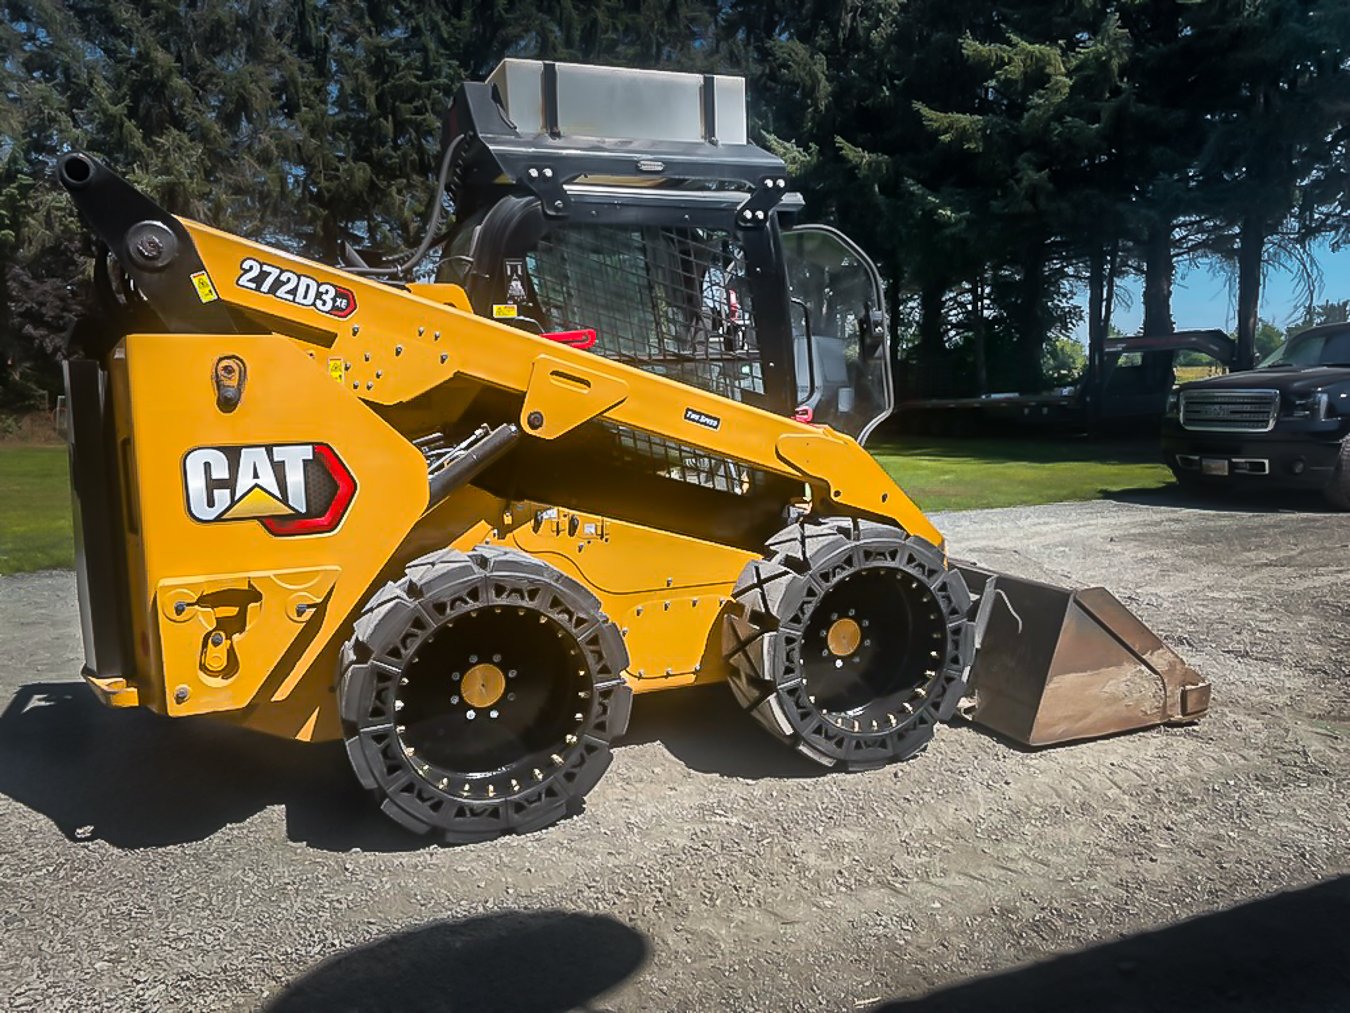 This images shows a CAT 272D3 HS with our EWRS HS skid steer tires.